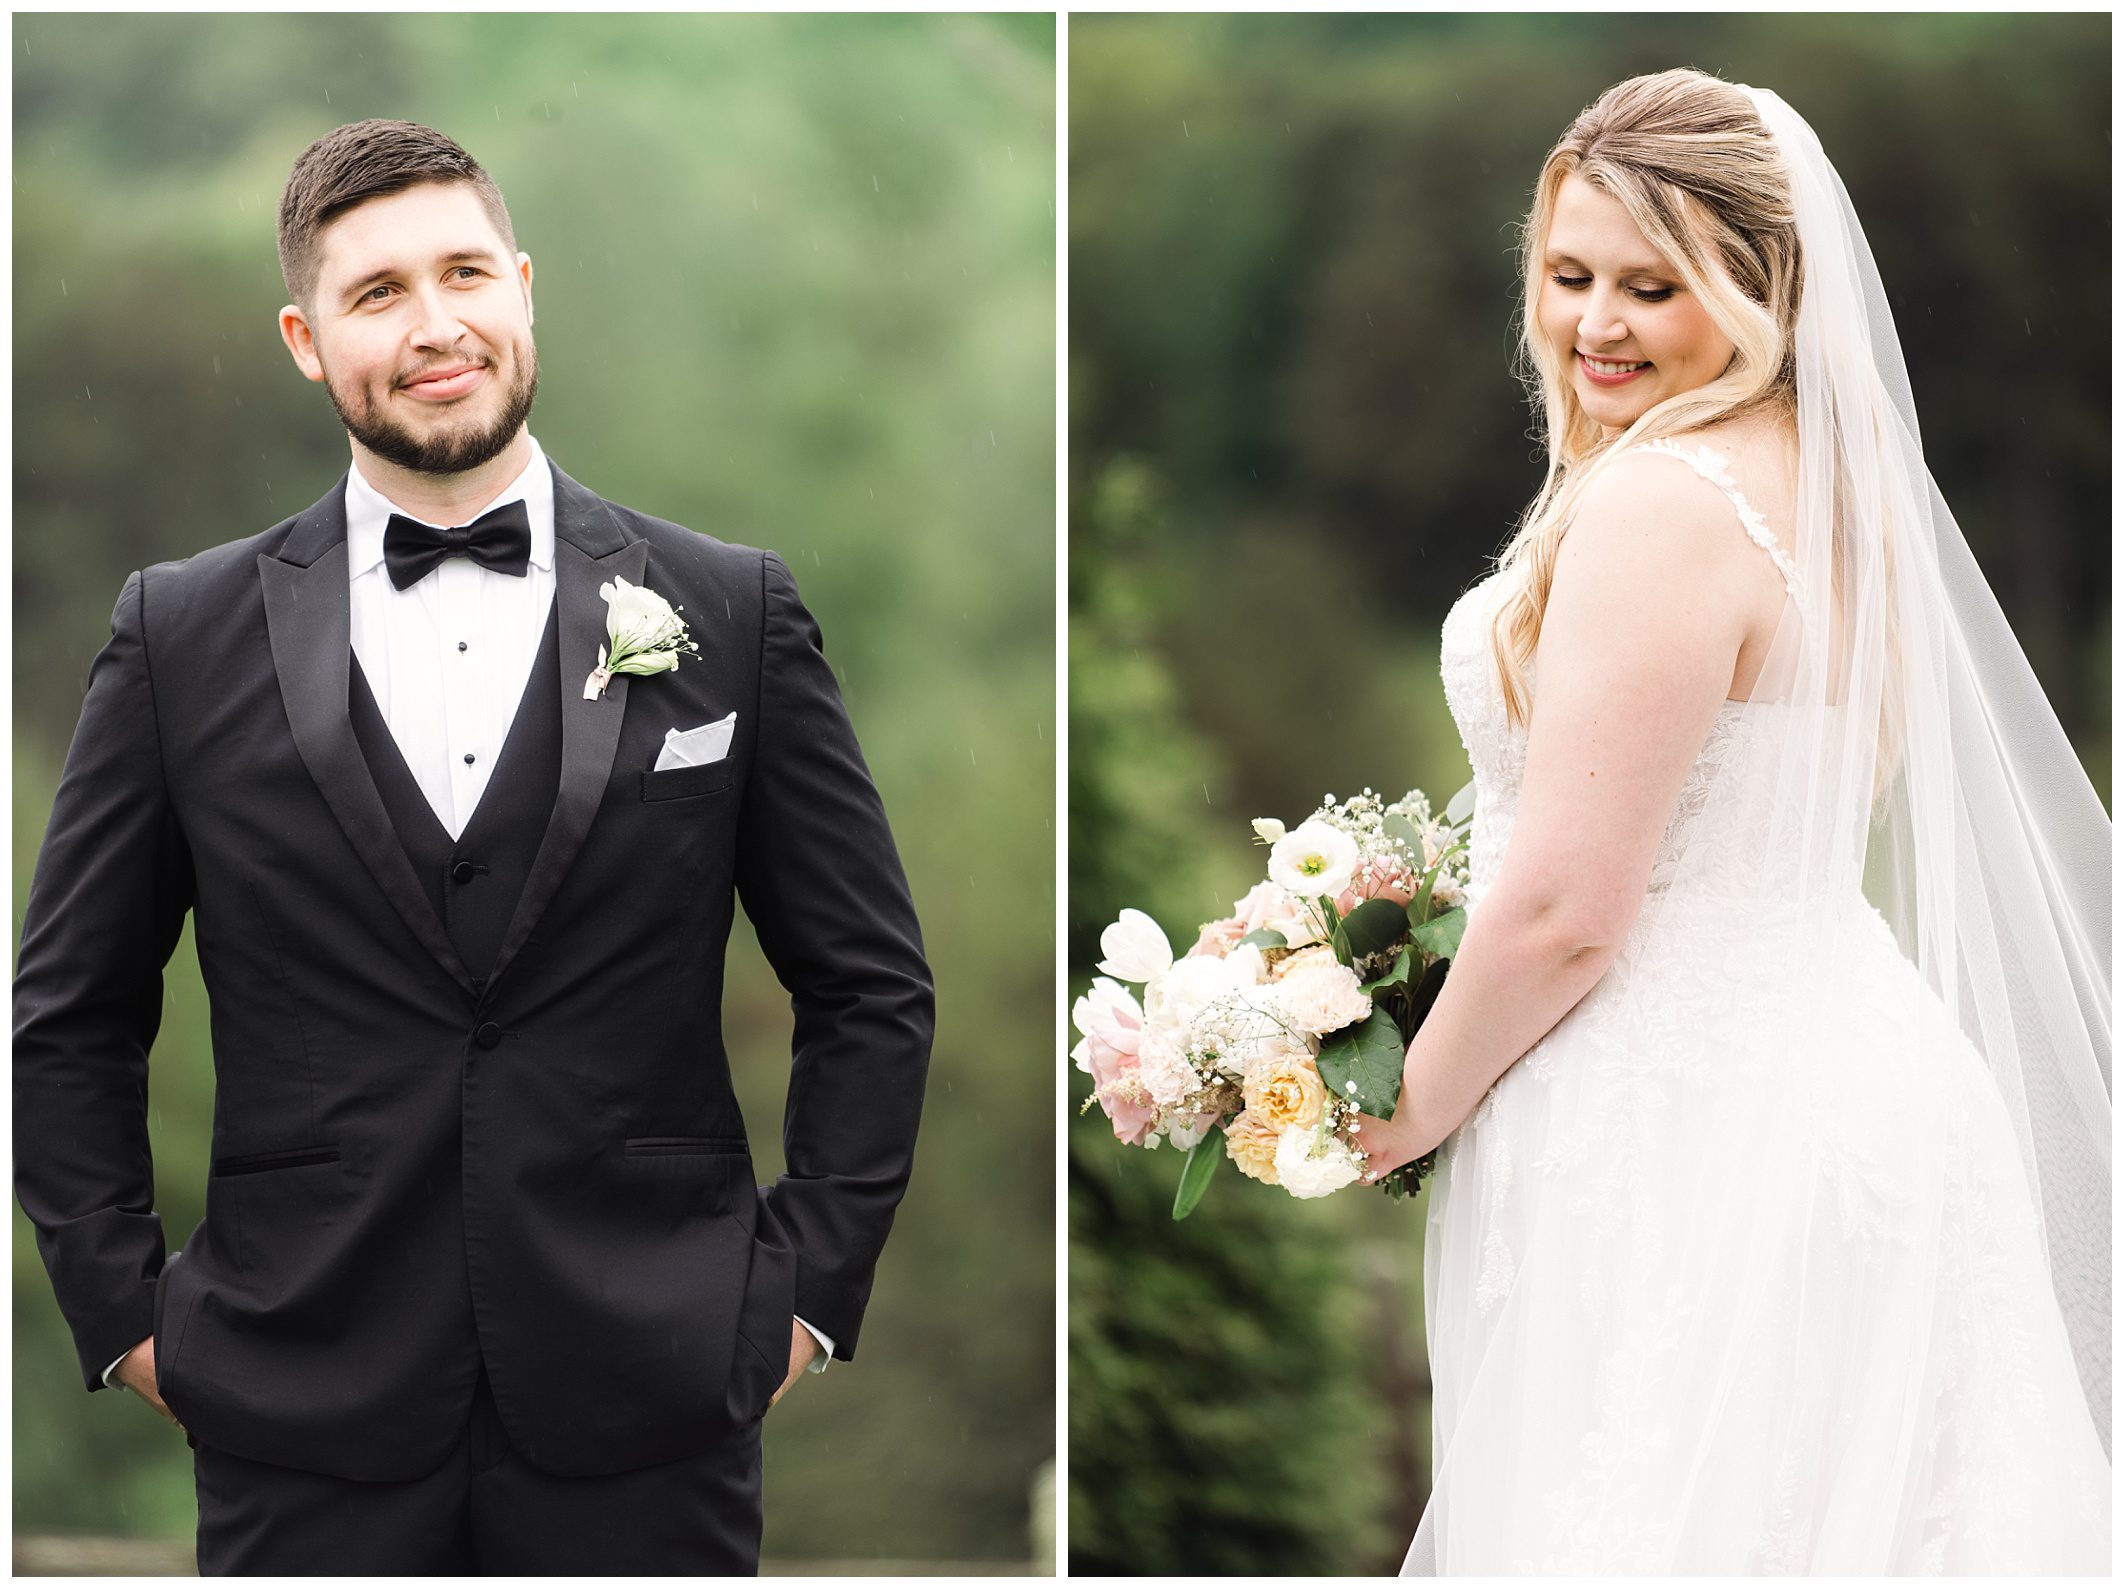 A groom in a black tuxedo and a bride in a white gown with a bouquet, each posing separately outdoors at Chestnut Ridge.